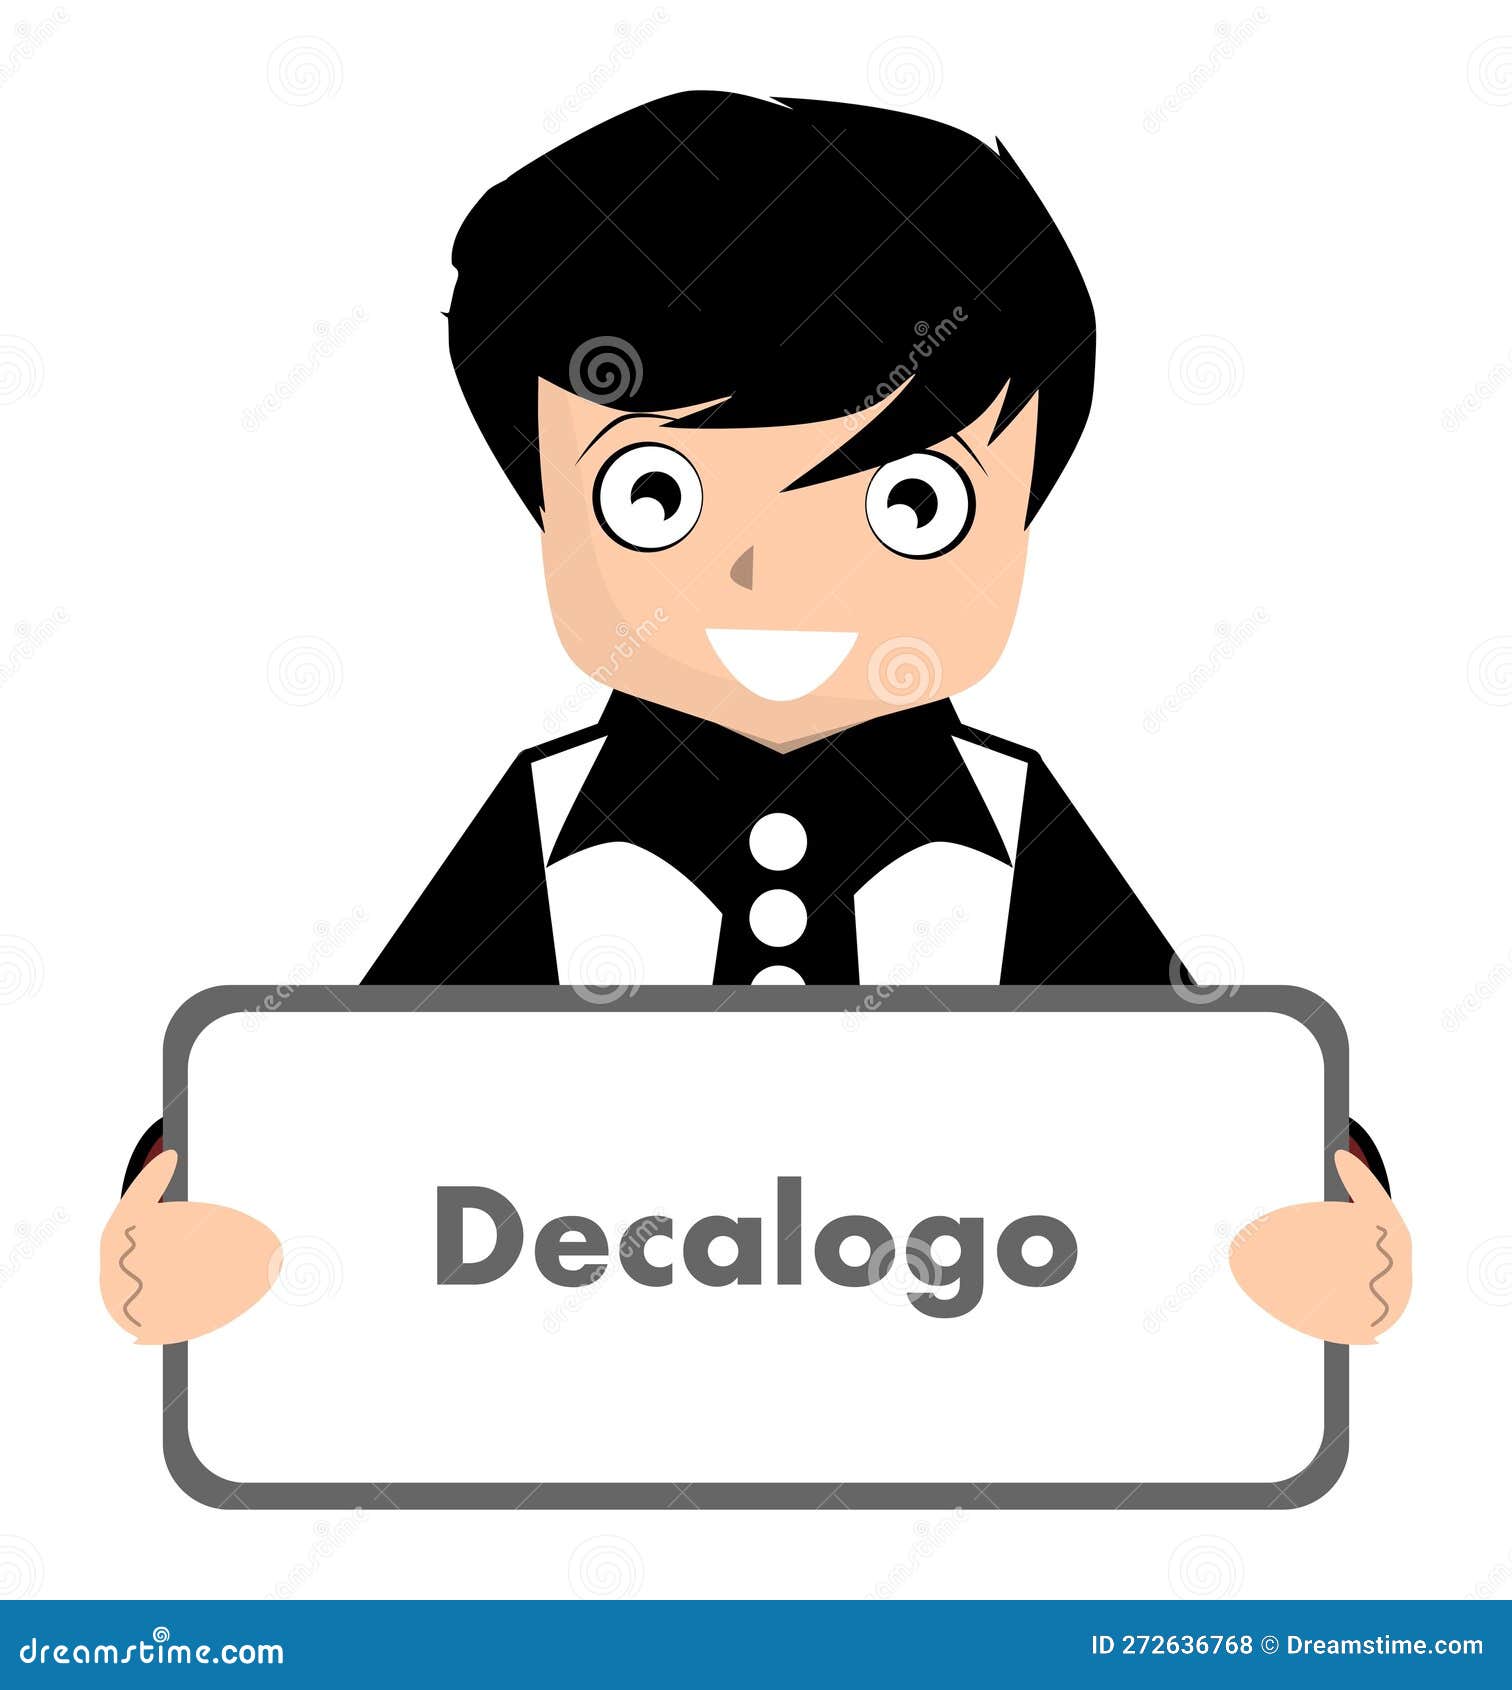 boy with decalogue sign, italian, rules, .